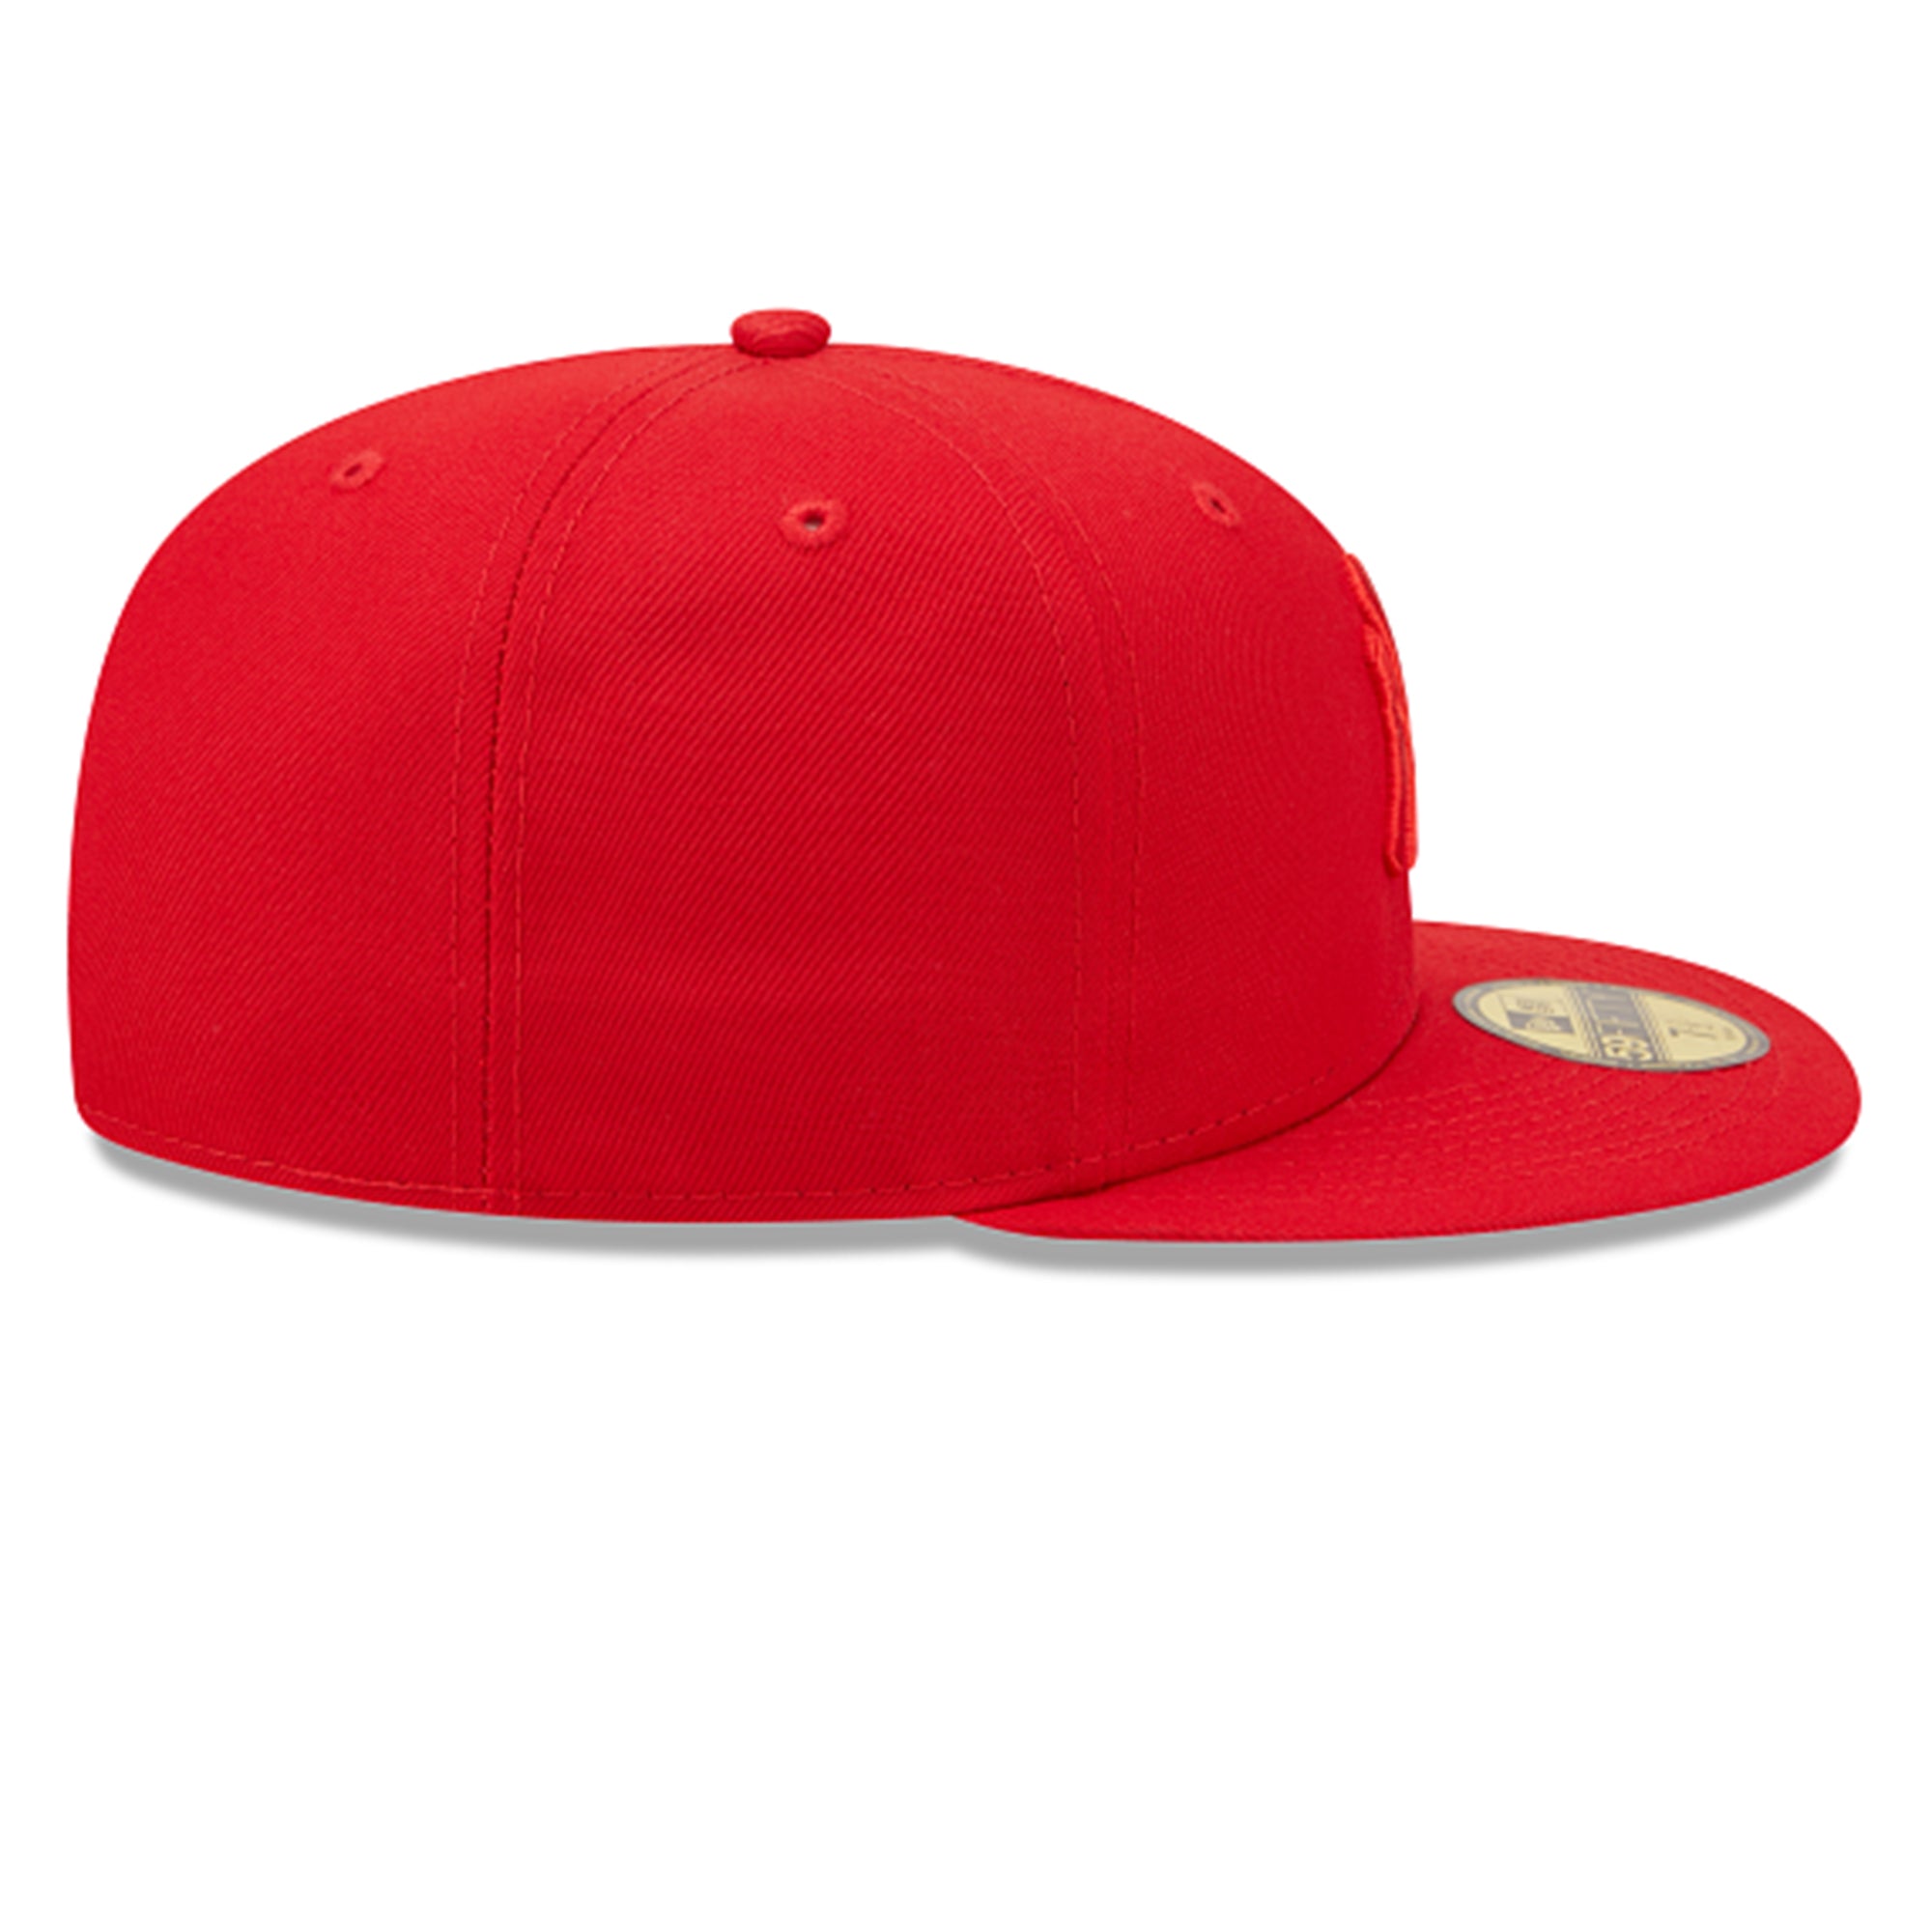 New Era New York Yankees Fitted Hat (Red)4